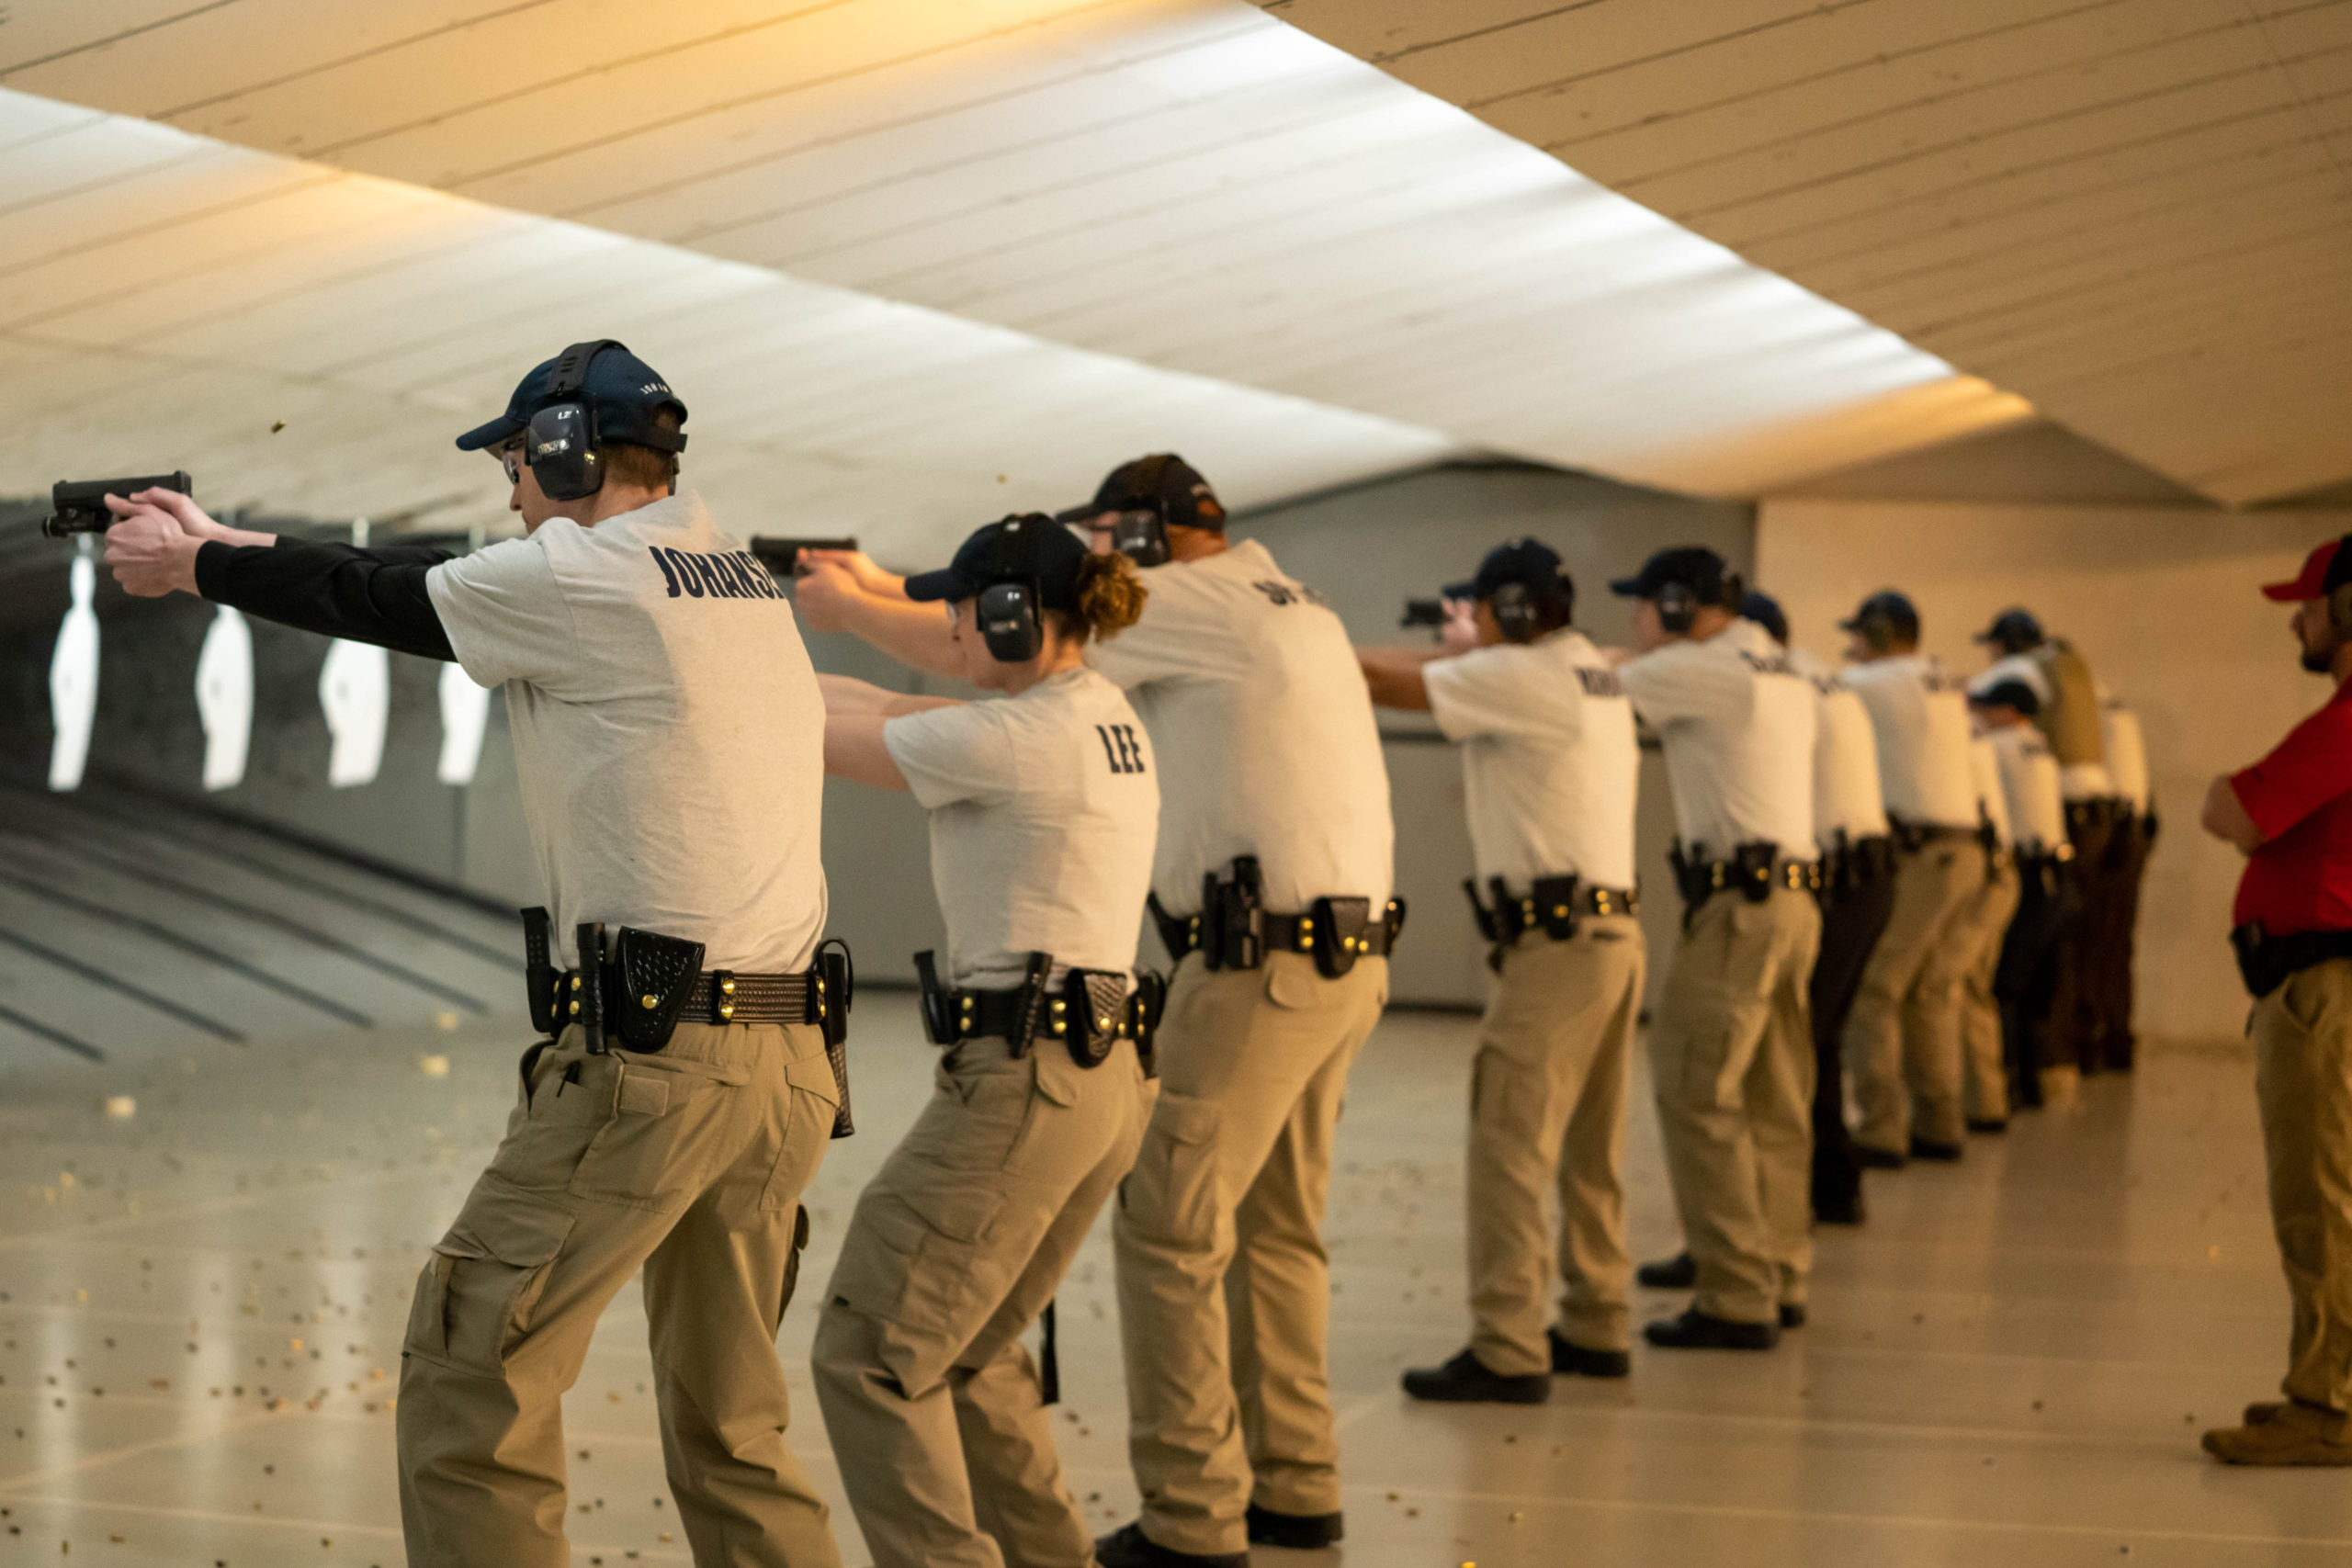 Cadets stand in a line and perform shooting exercises